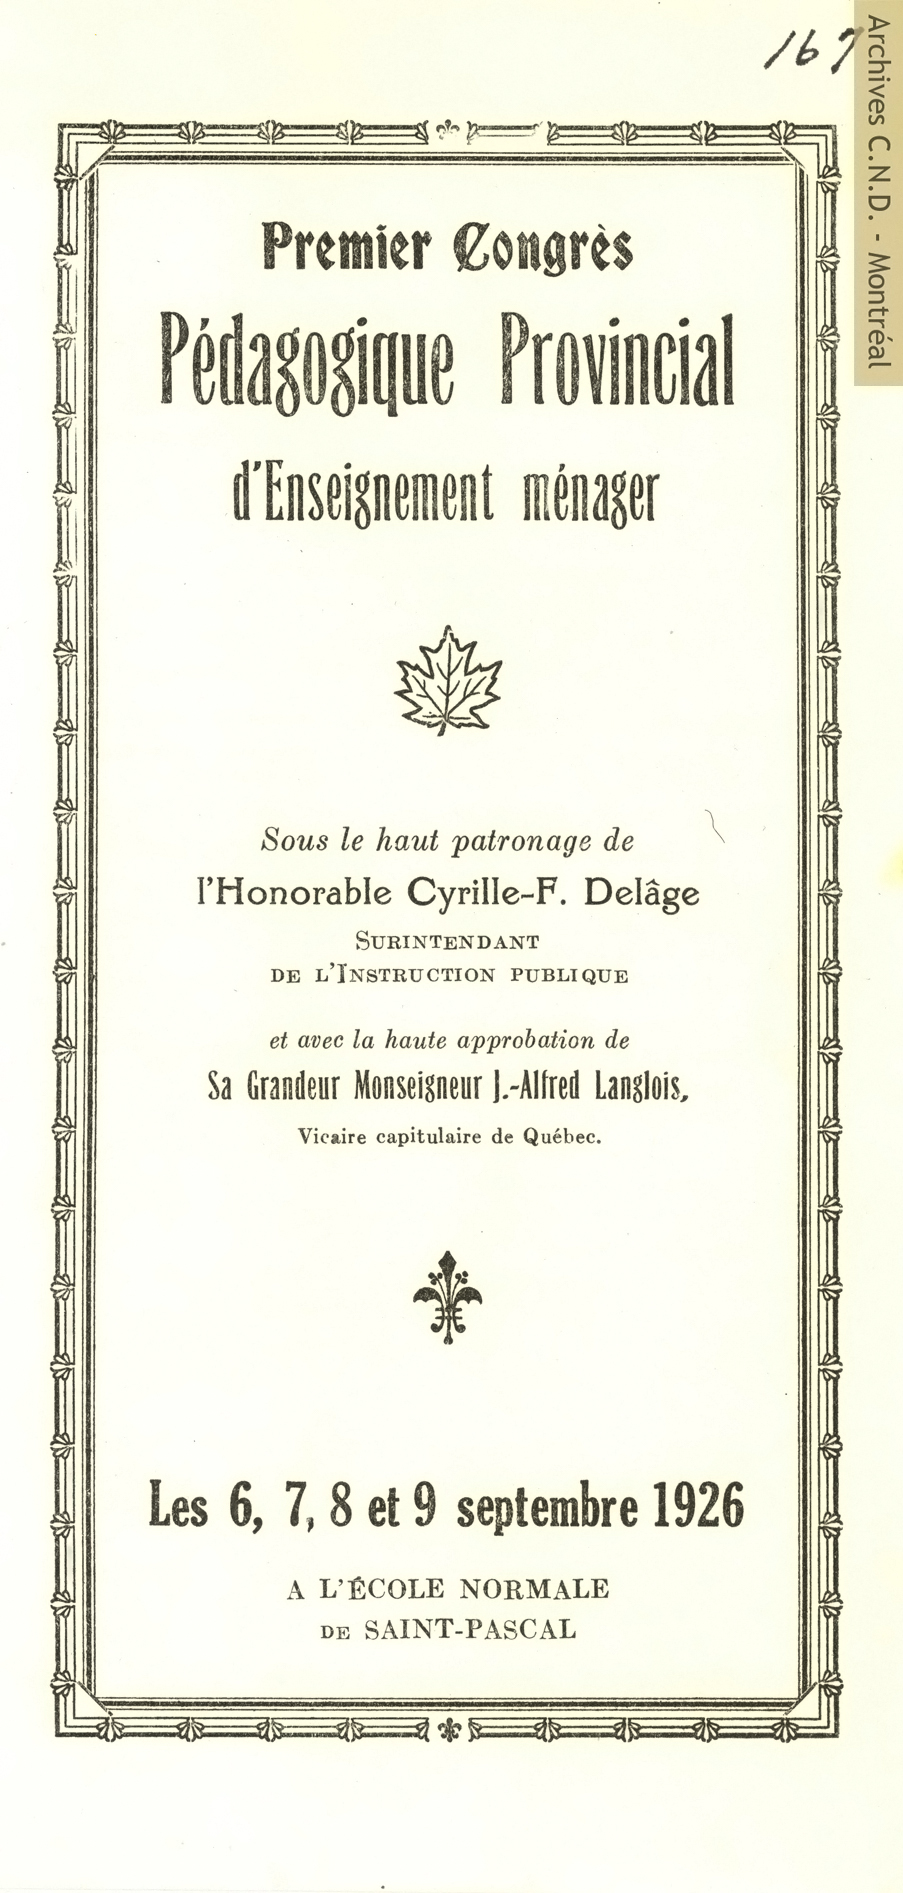 Programme of the first Provincial Pedagogical Congress on Domestic Science at École normale classico-ménagère